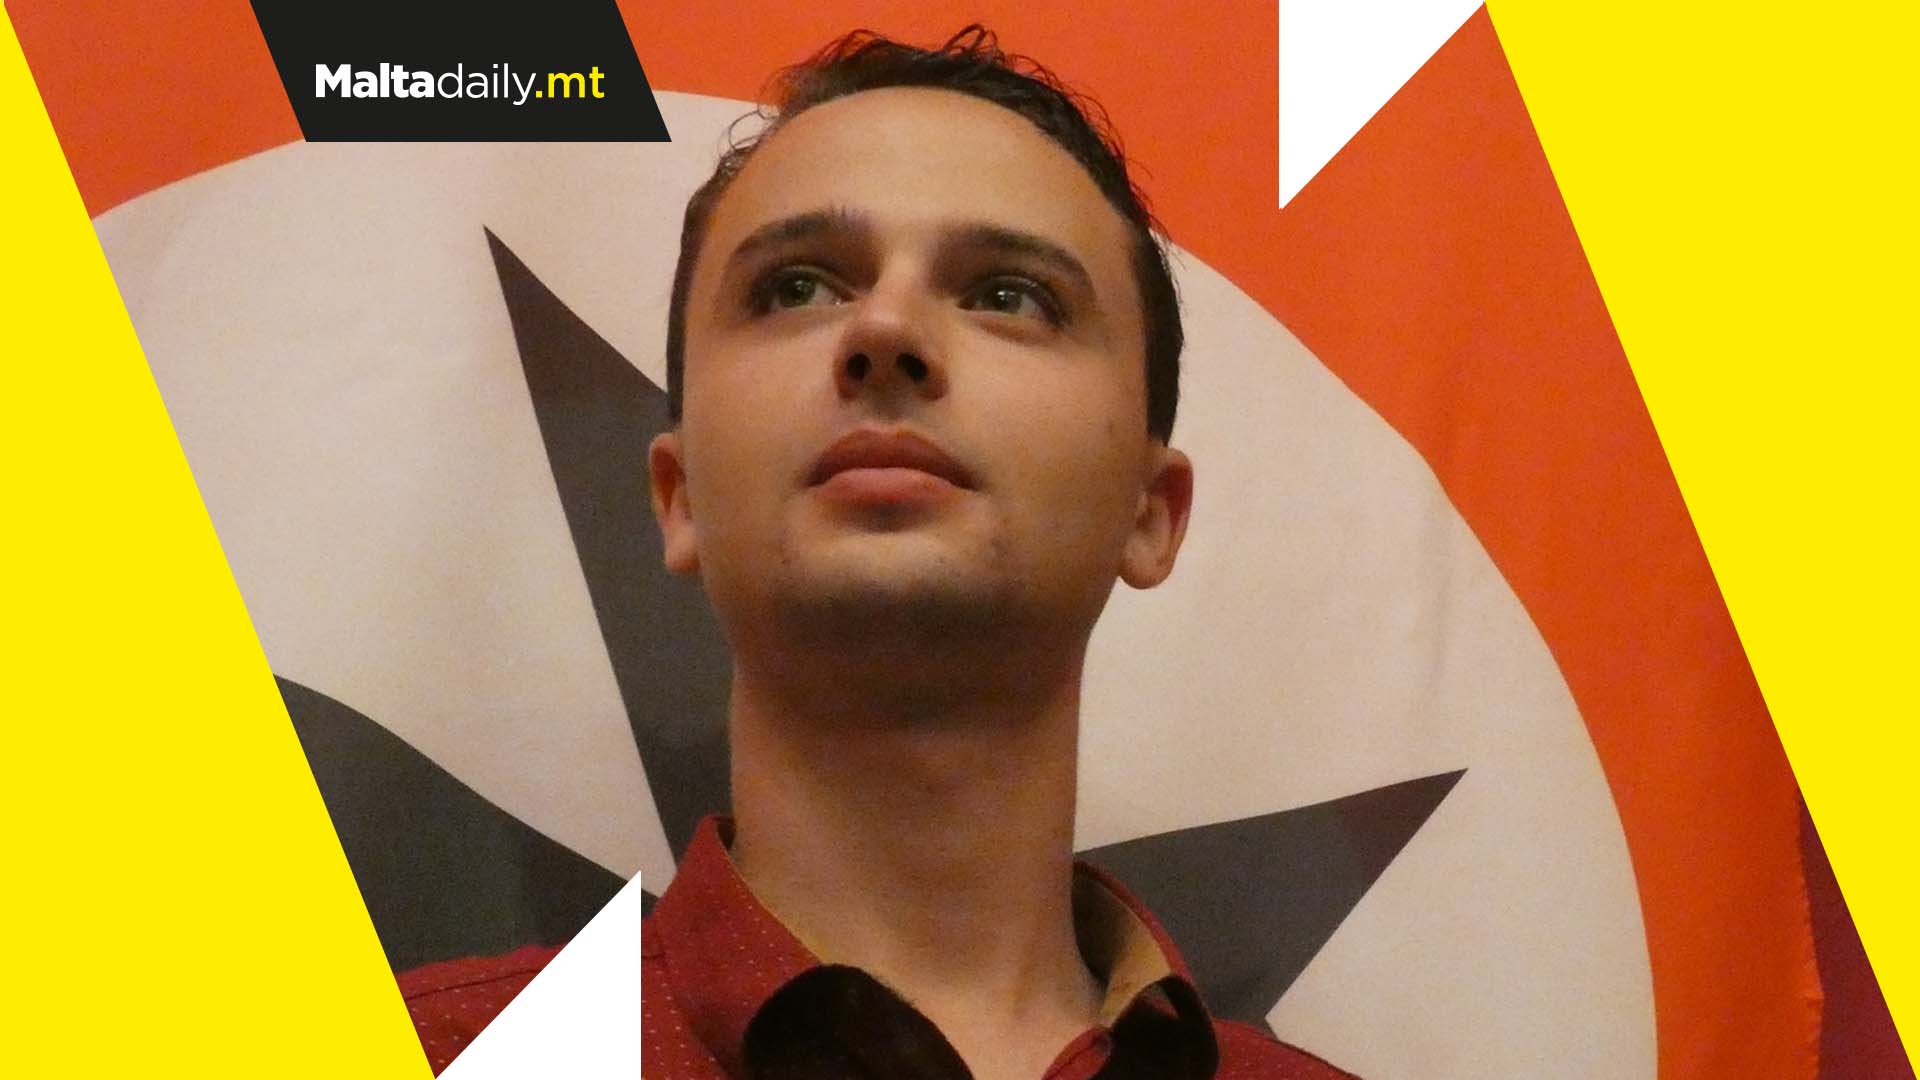 Far-right youth leader charged with threatening mother and carrying unlicensed firearm